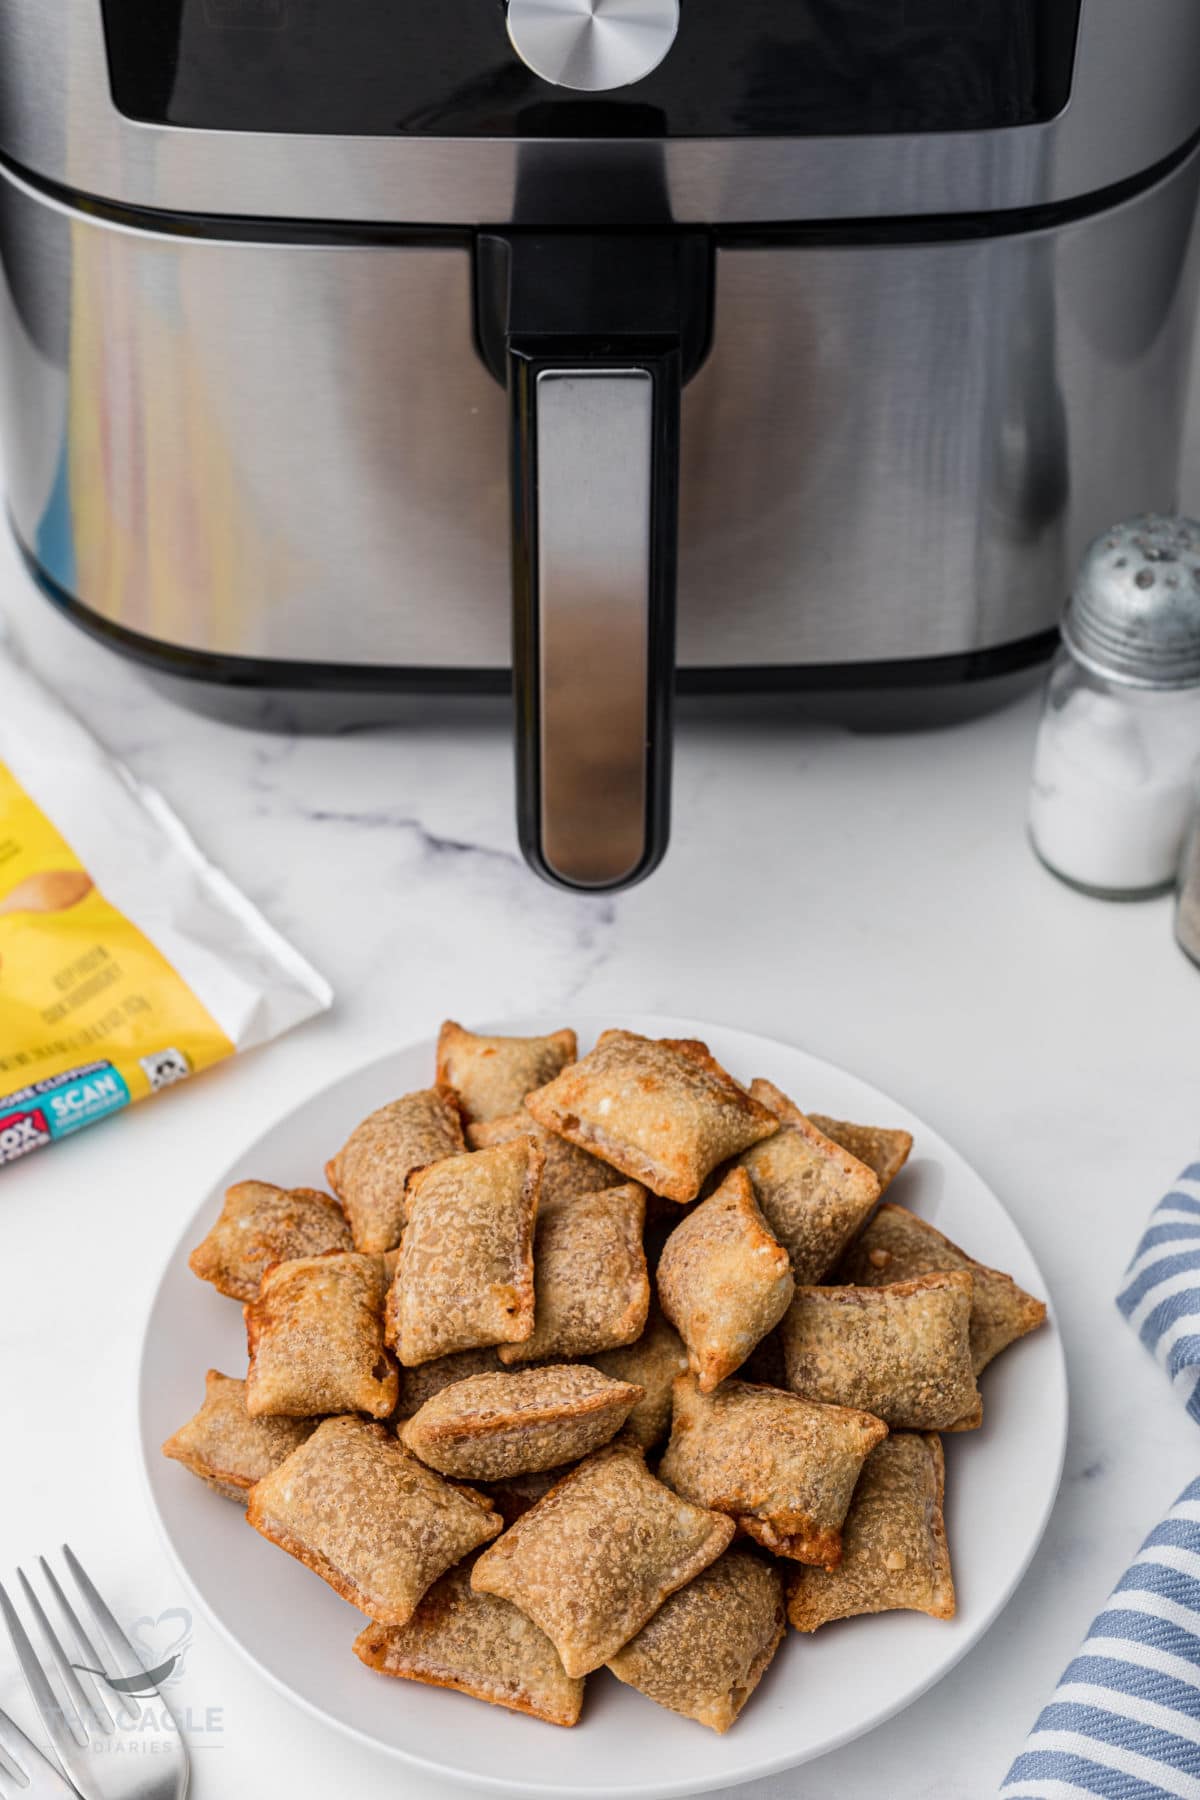 Totinos Pizza Rolls in the air fryer